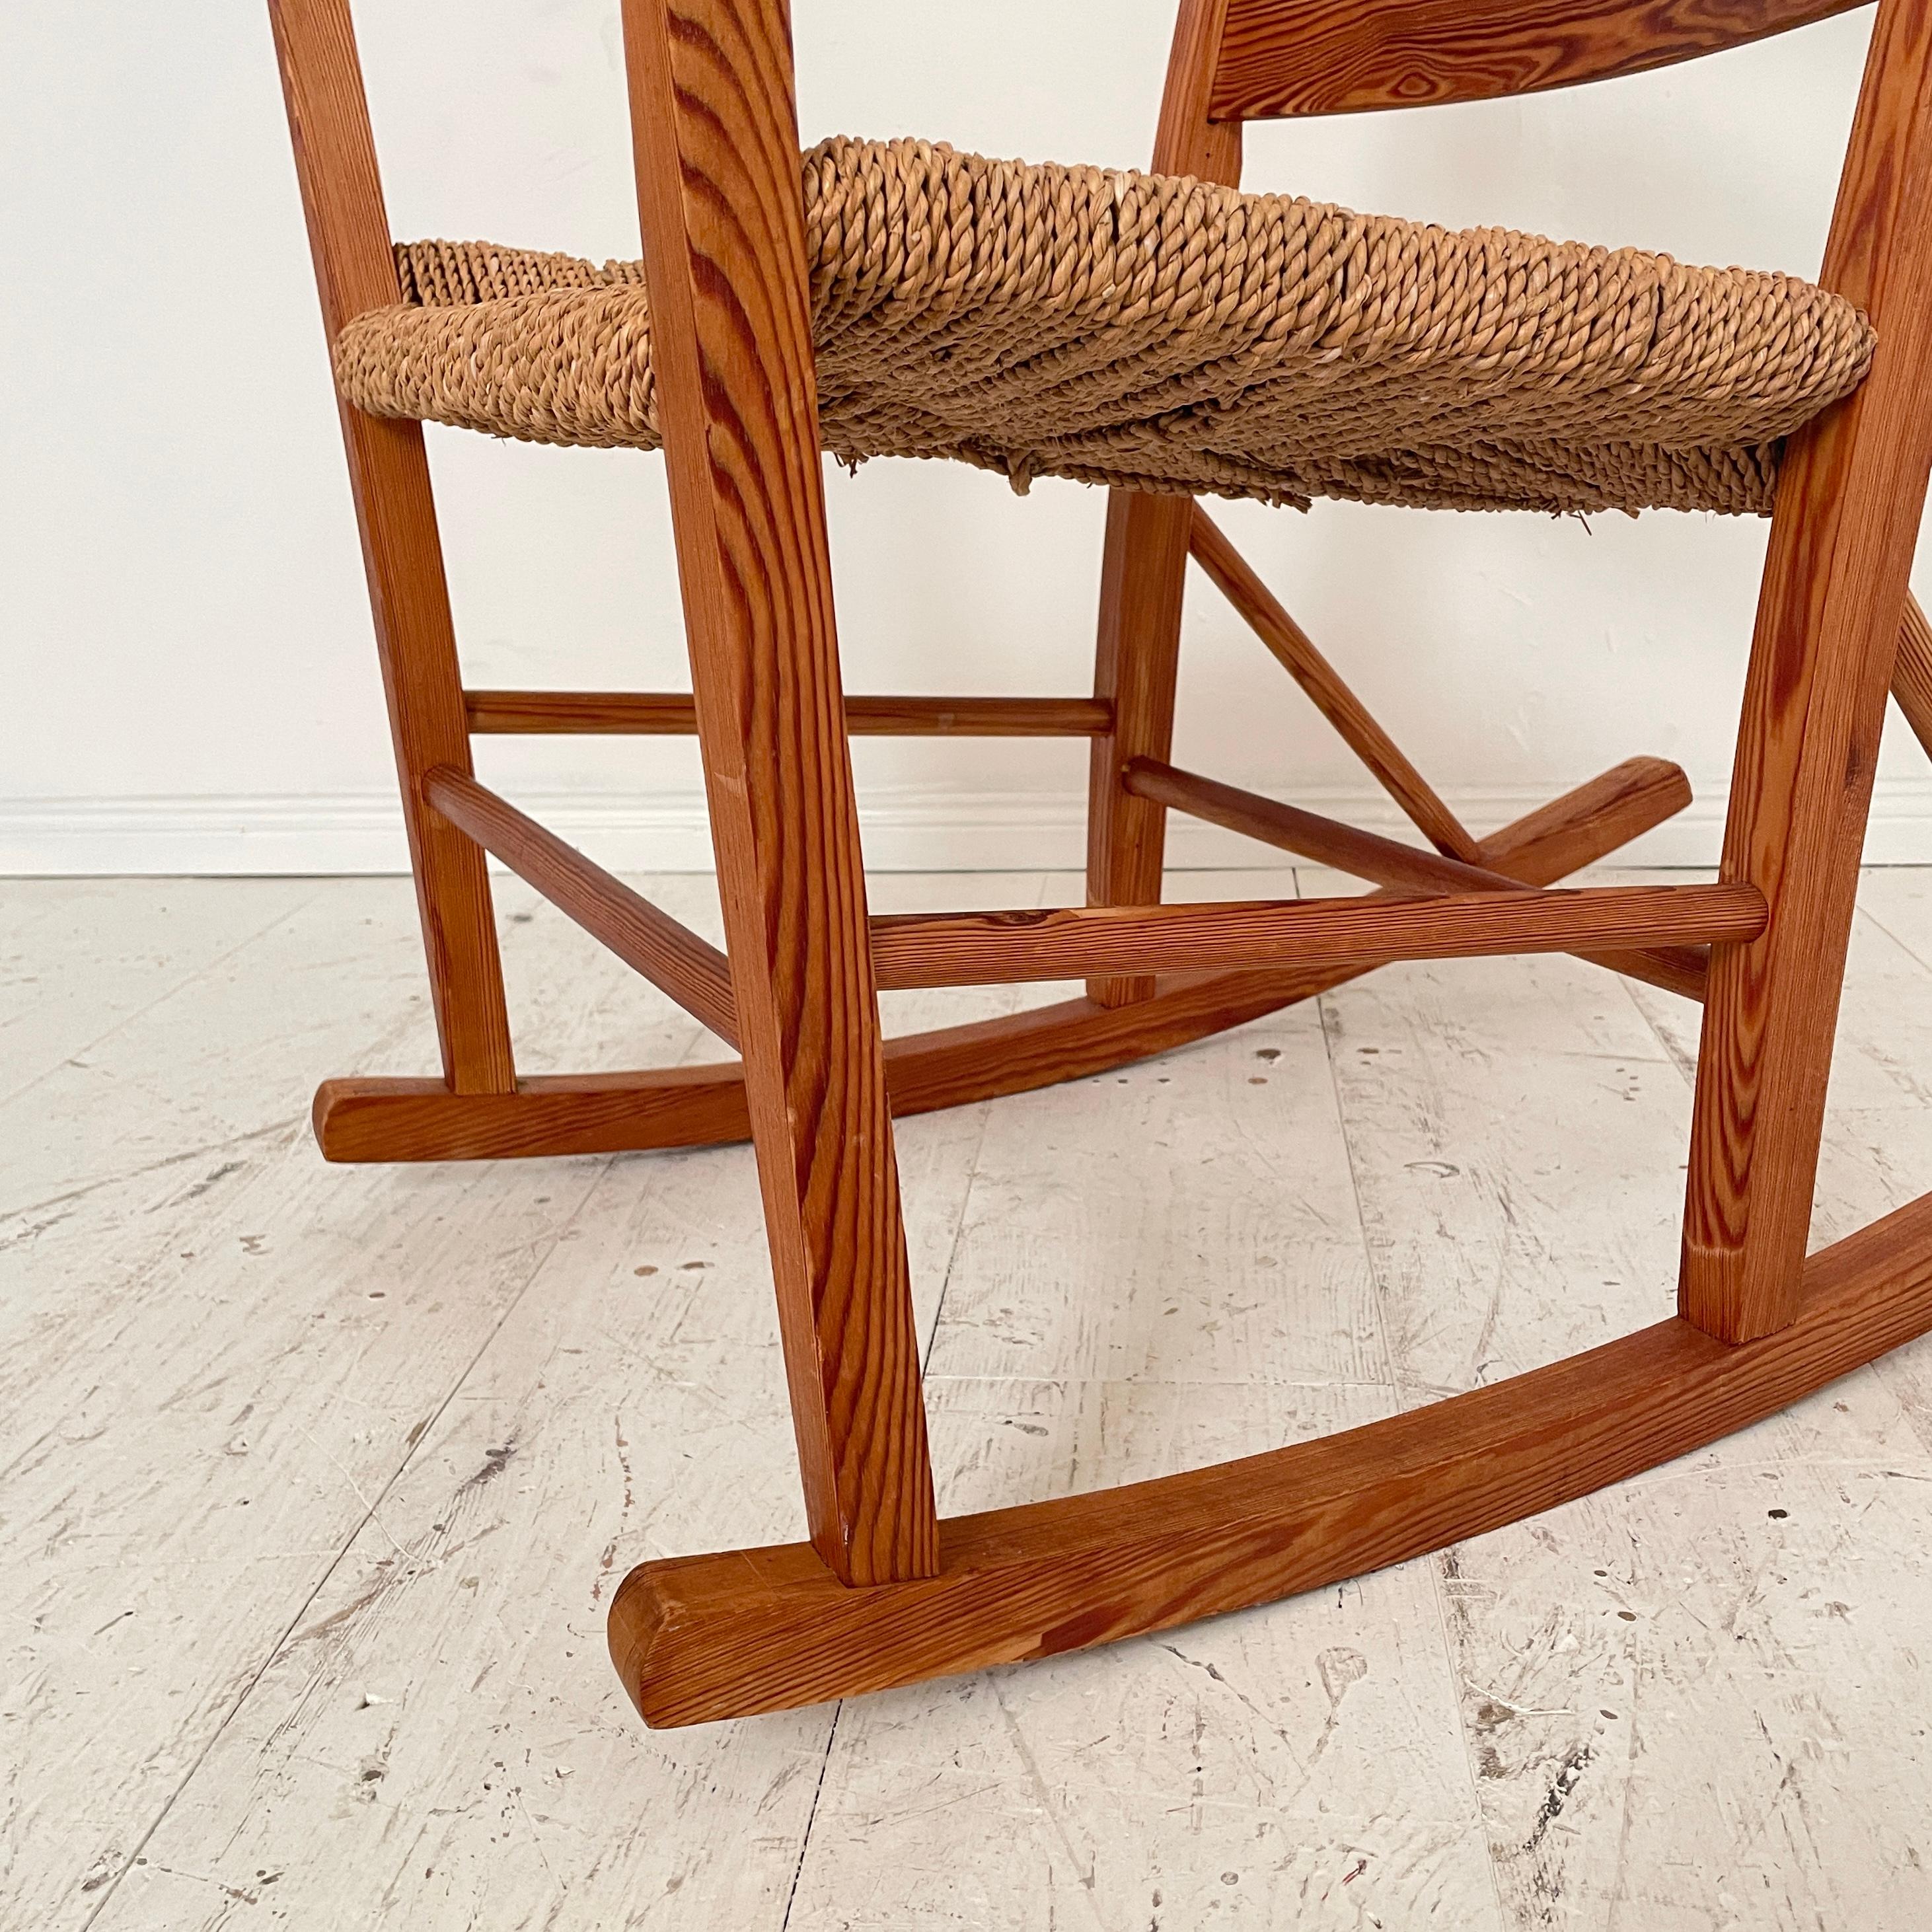 Mid-20th Century Norwegian Rocking Chair by Aksel Hansson in Pine, 1930 For Sale